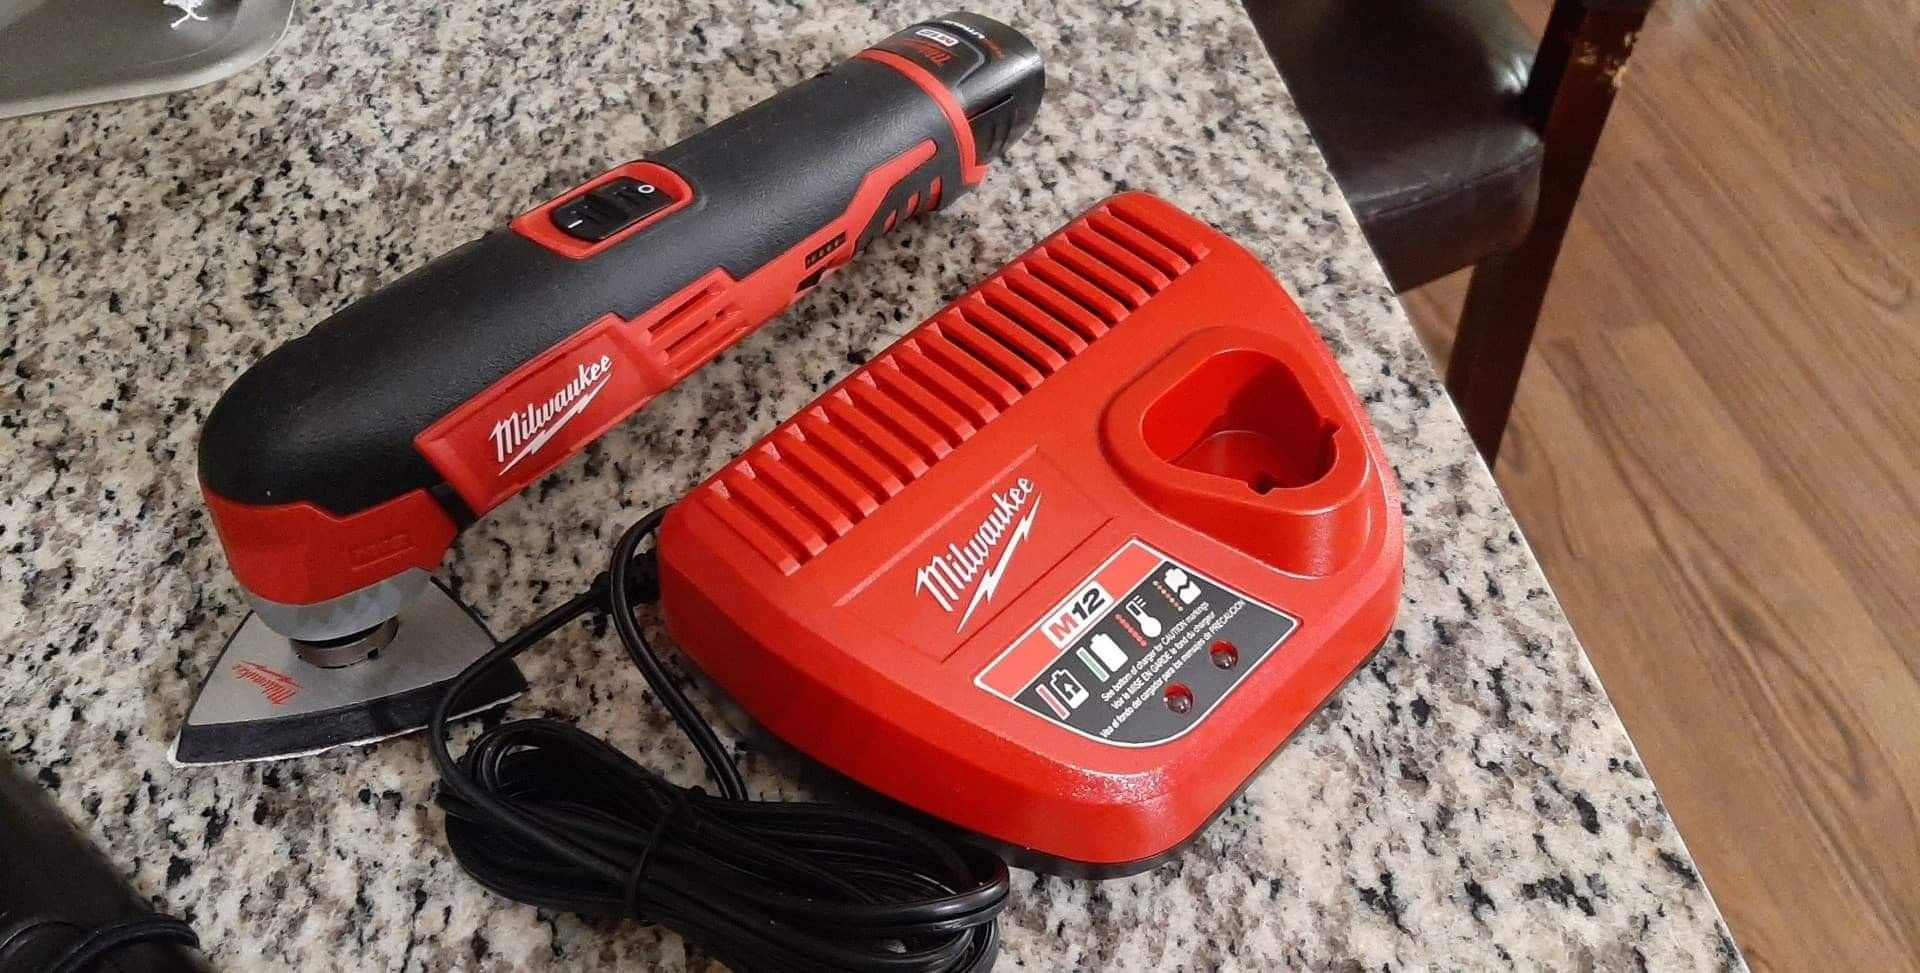 Milwaukee Multi-tool 2426-20 with 2.0 battery and charger